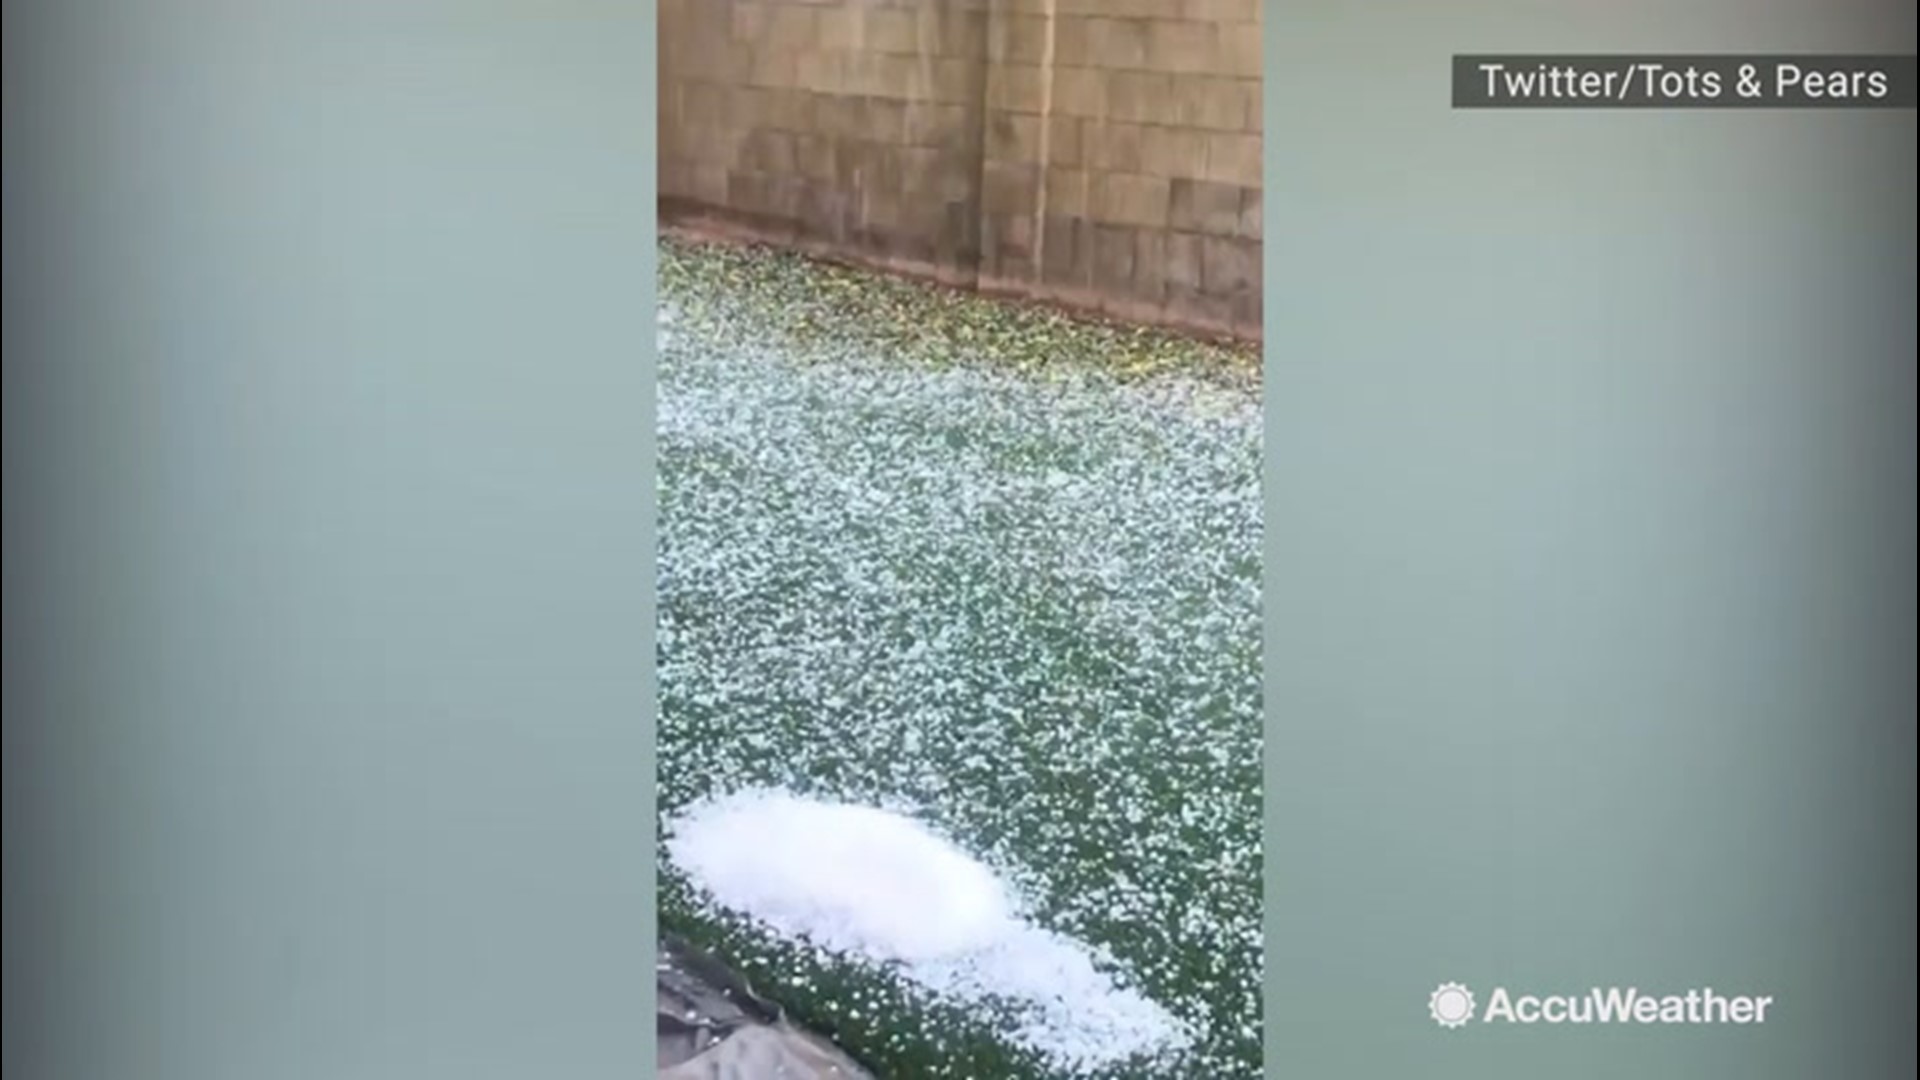 This is what this yard in Gilbert, Arizona, looks like after just 10 minutes of hail on Dec. 9. What a mess the storm left behind.